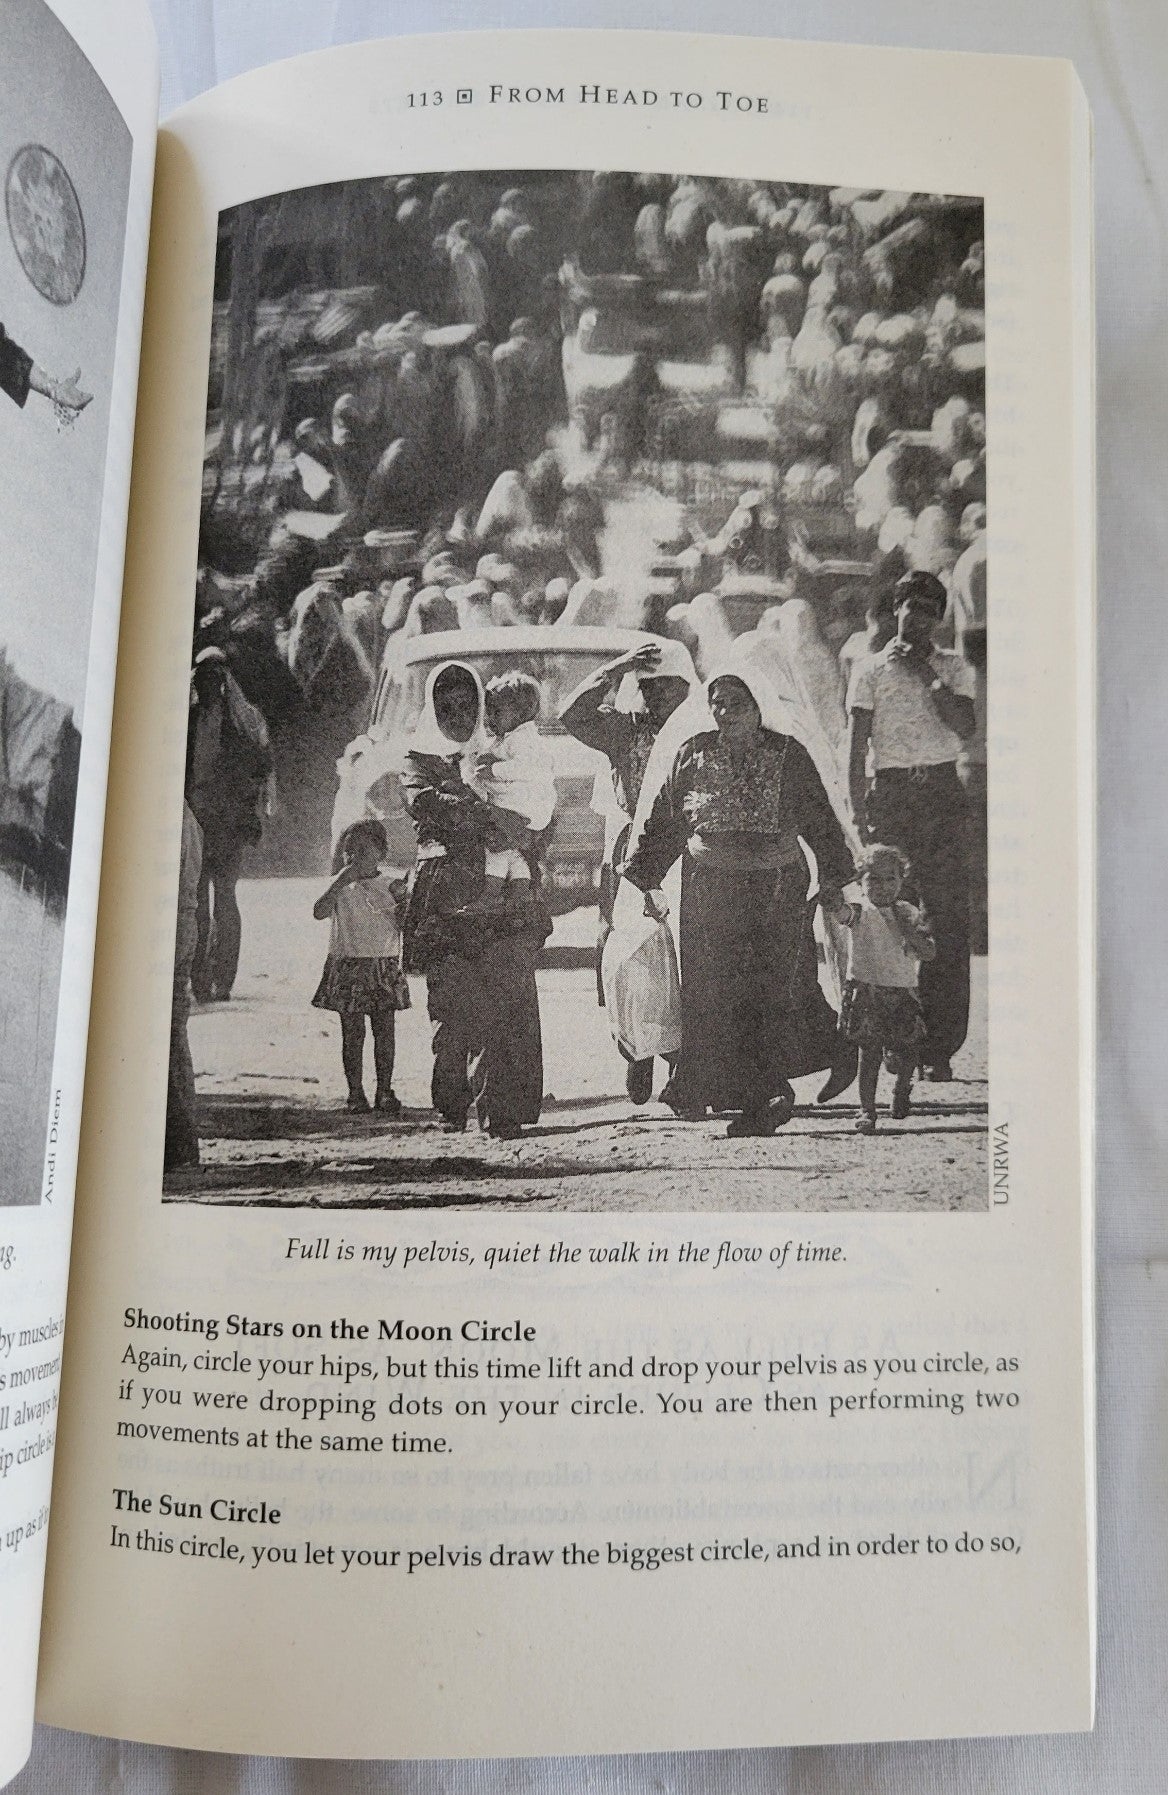 Used book for sale “Grandmother's Secrets: The Ancient Rituals and Healing Power of Belly Dancing” written by Rosina-Fawzia Al-Rawi, translated by Monique Arav.  View of page 113 with photograph.